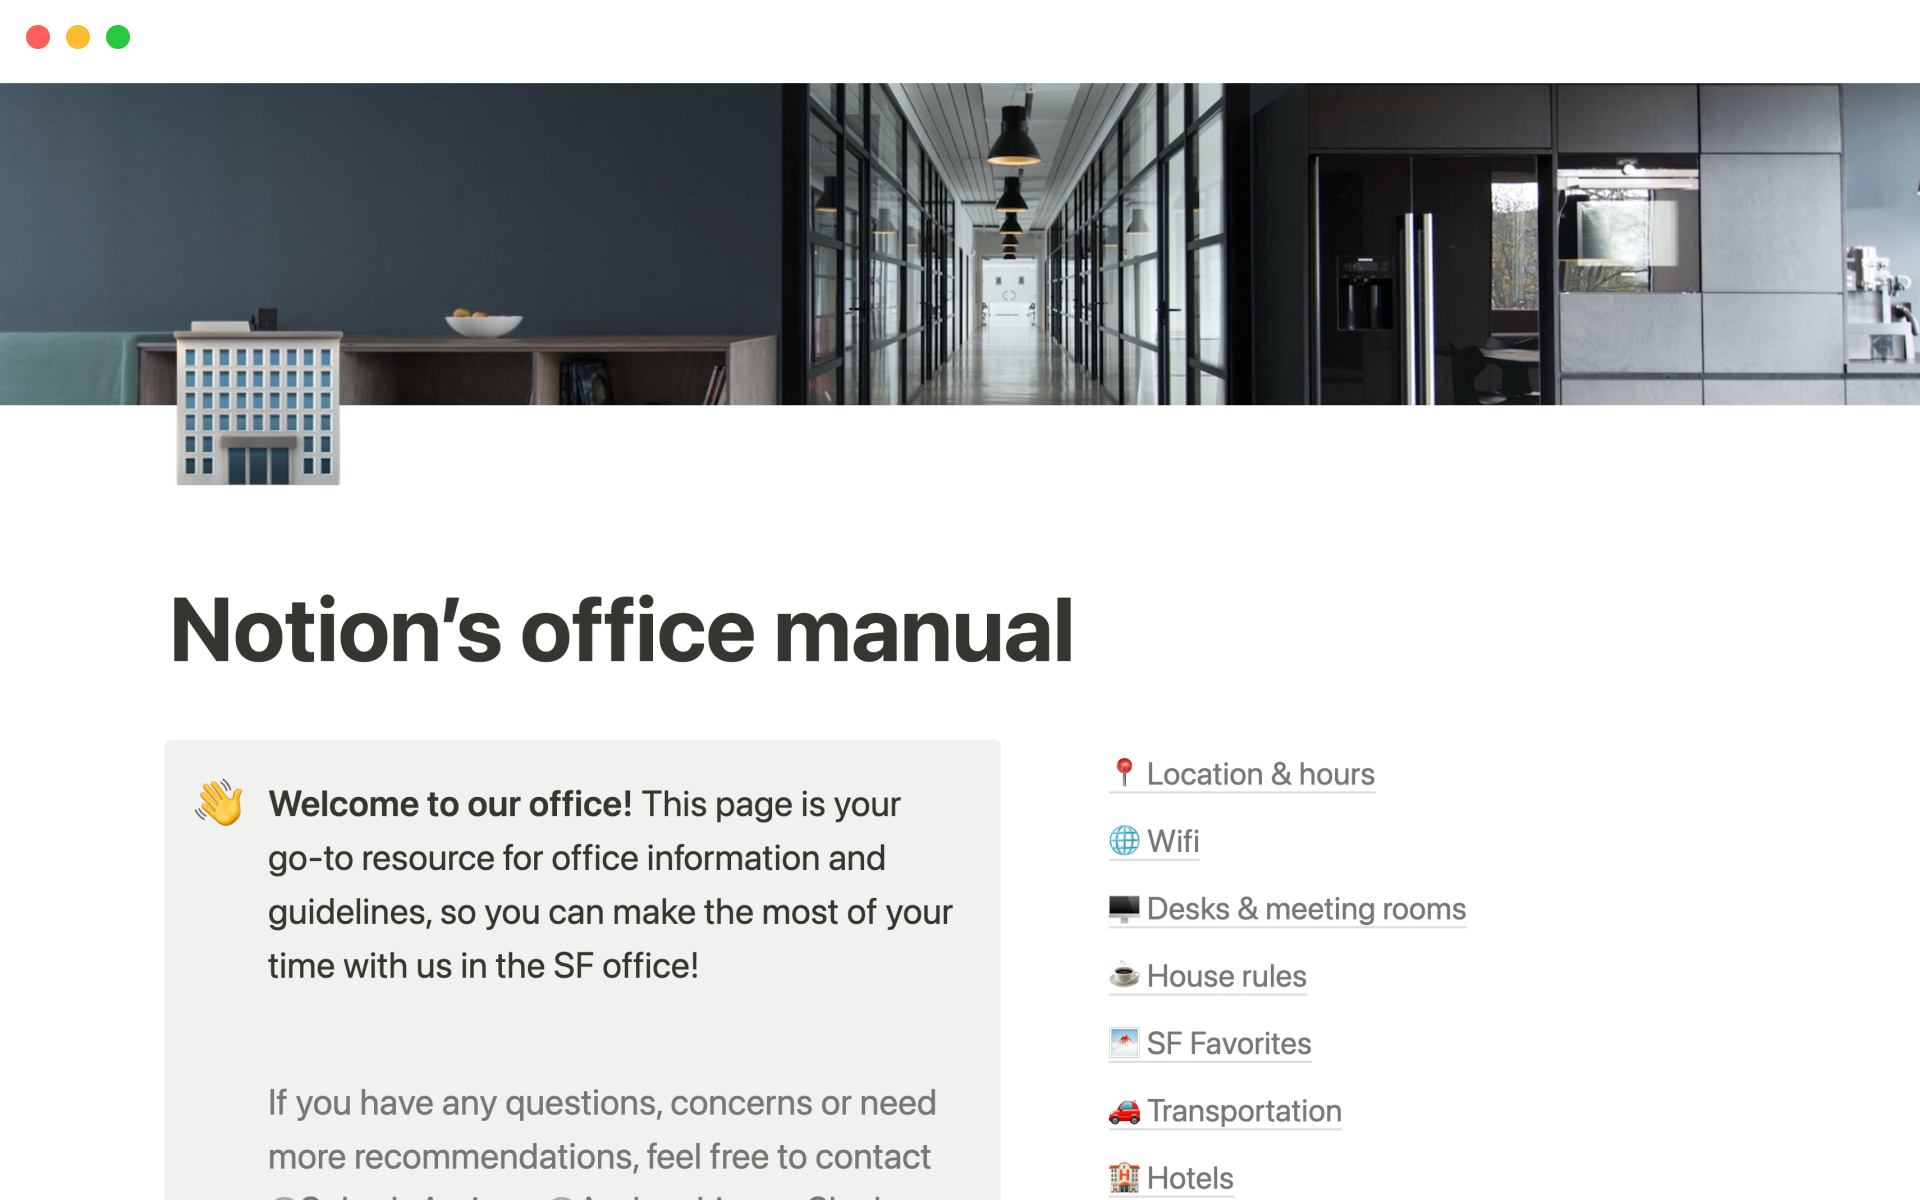 Easily keep track of and share office information and guidelines.